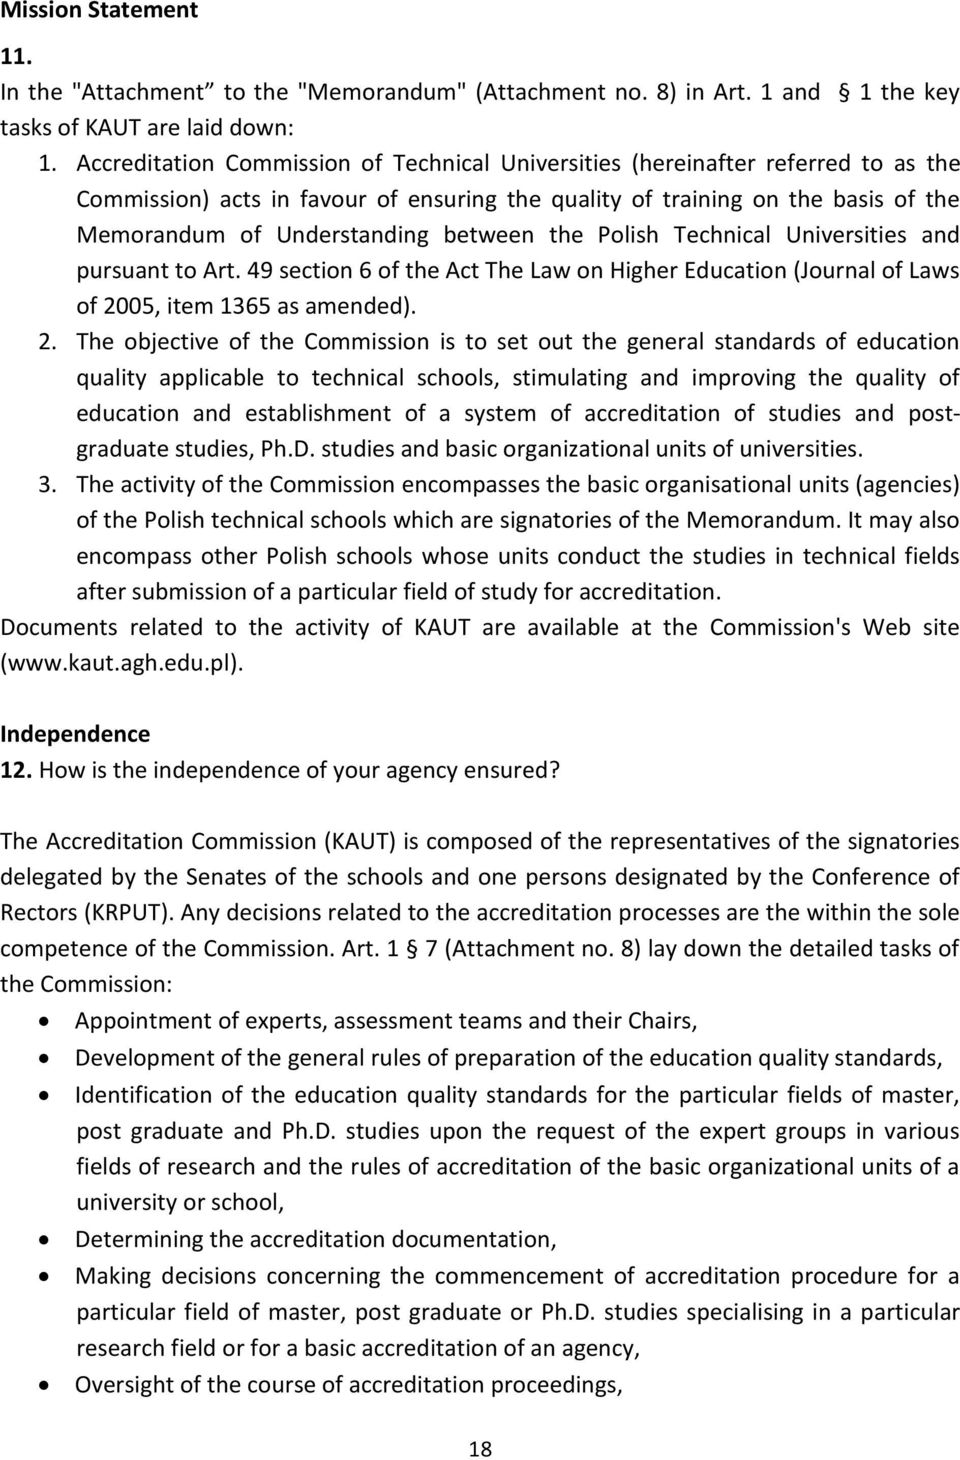 between the Polish Technical Universities and pursuant to Art. 49 section 6 of the Act The Law on Higher Education (Journal of Laws of 20